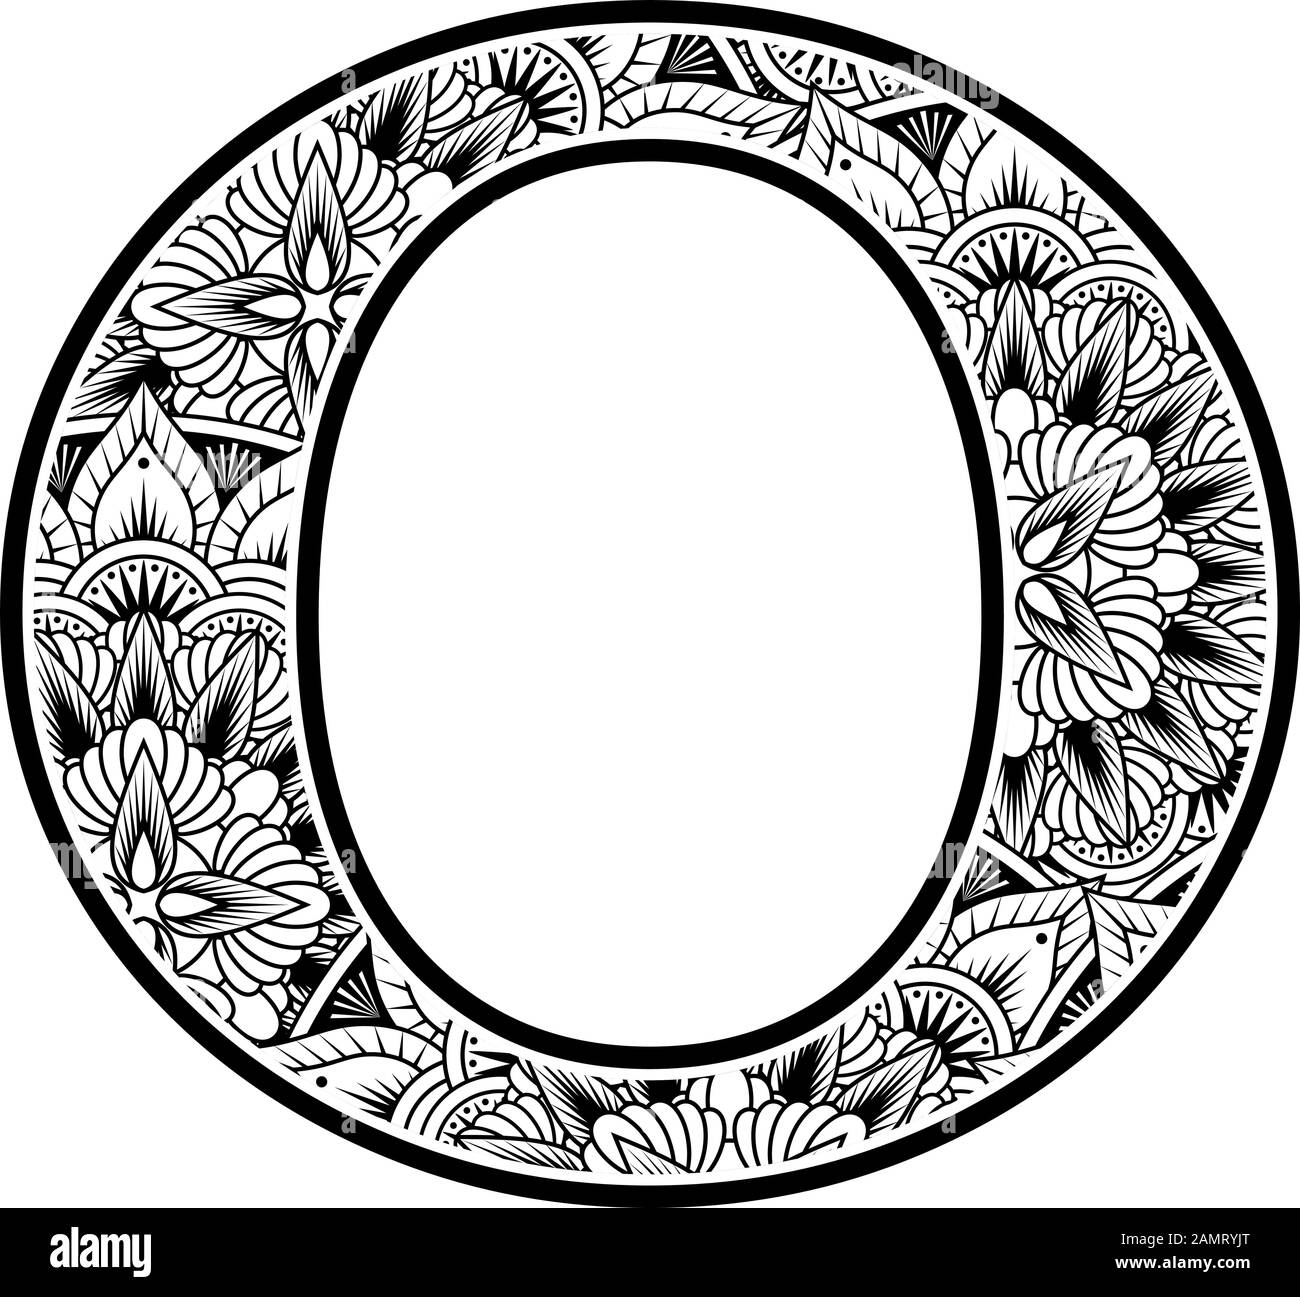 capital letter o with abstract flowers ornaments in black and white. design inspired from mandala art style for coloring. Isolated on white background Stock Vector